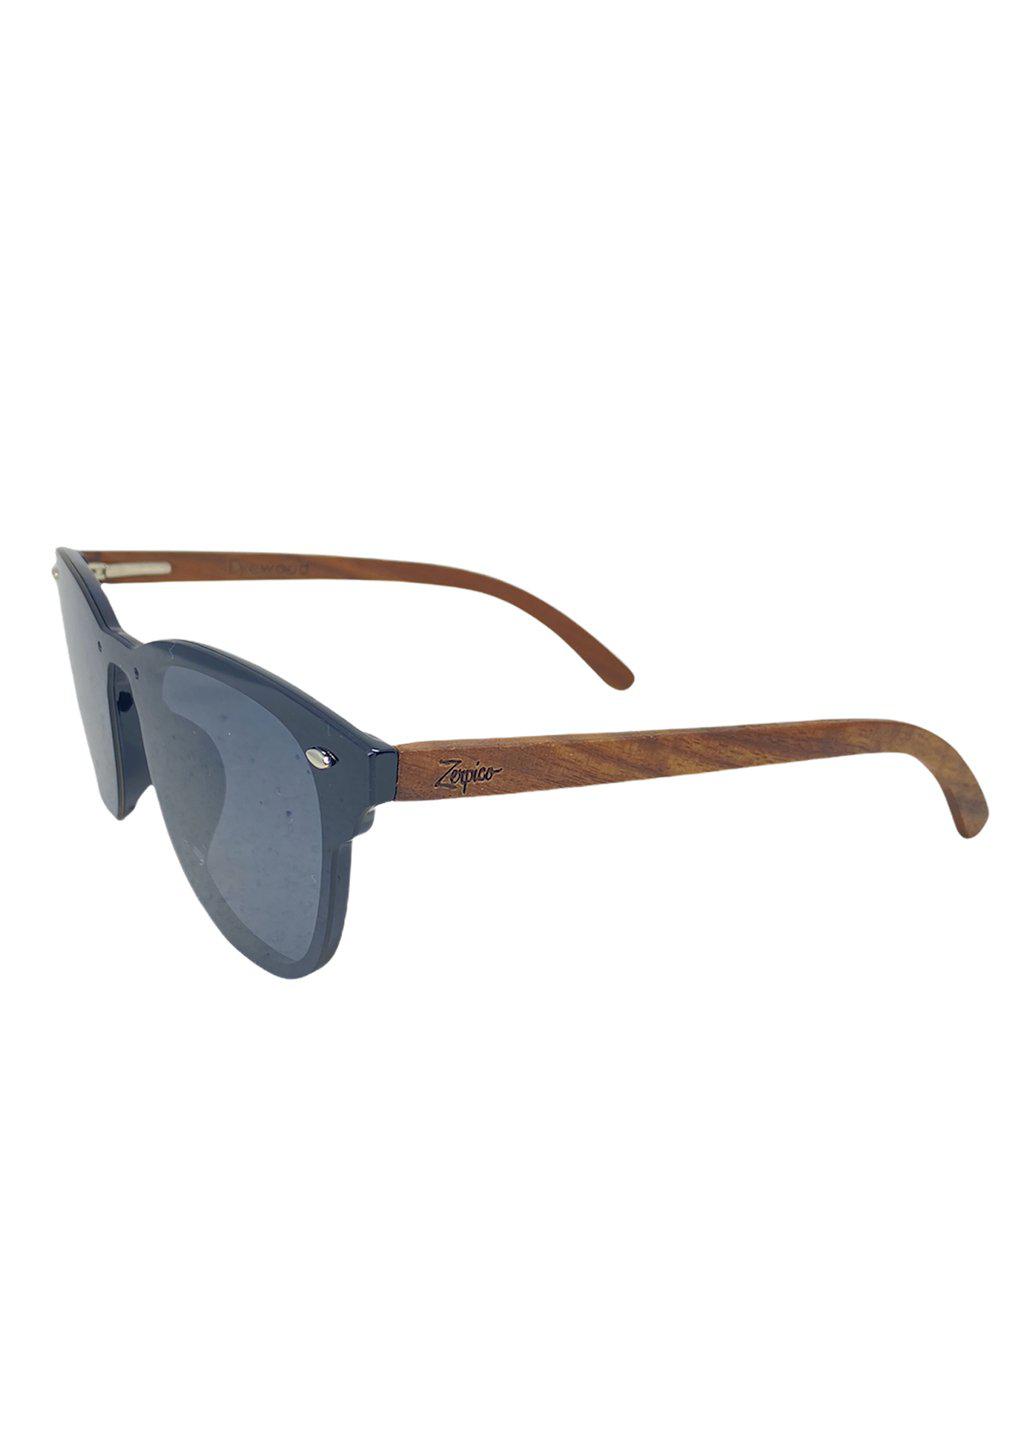 Eyewood tomorrow is our modern cool take on classic models. This is Fornax with black lenses. With walnut wooden sides. Studio shoot from the side.